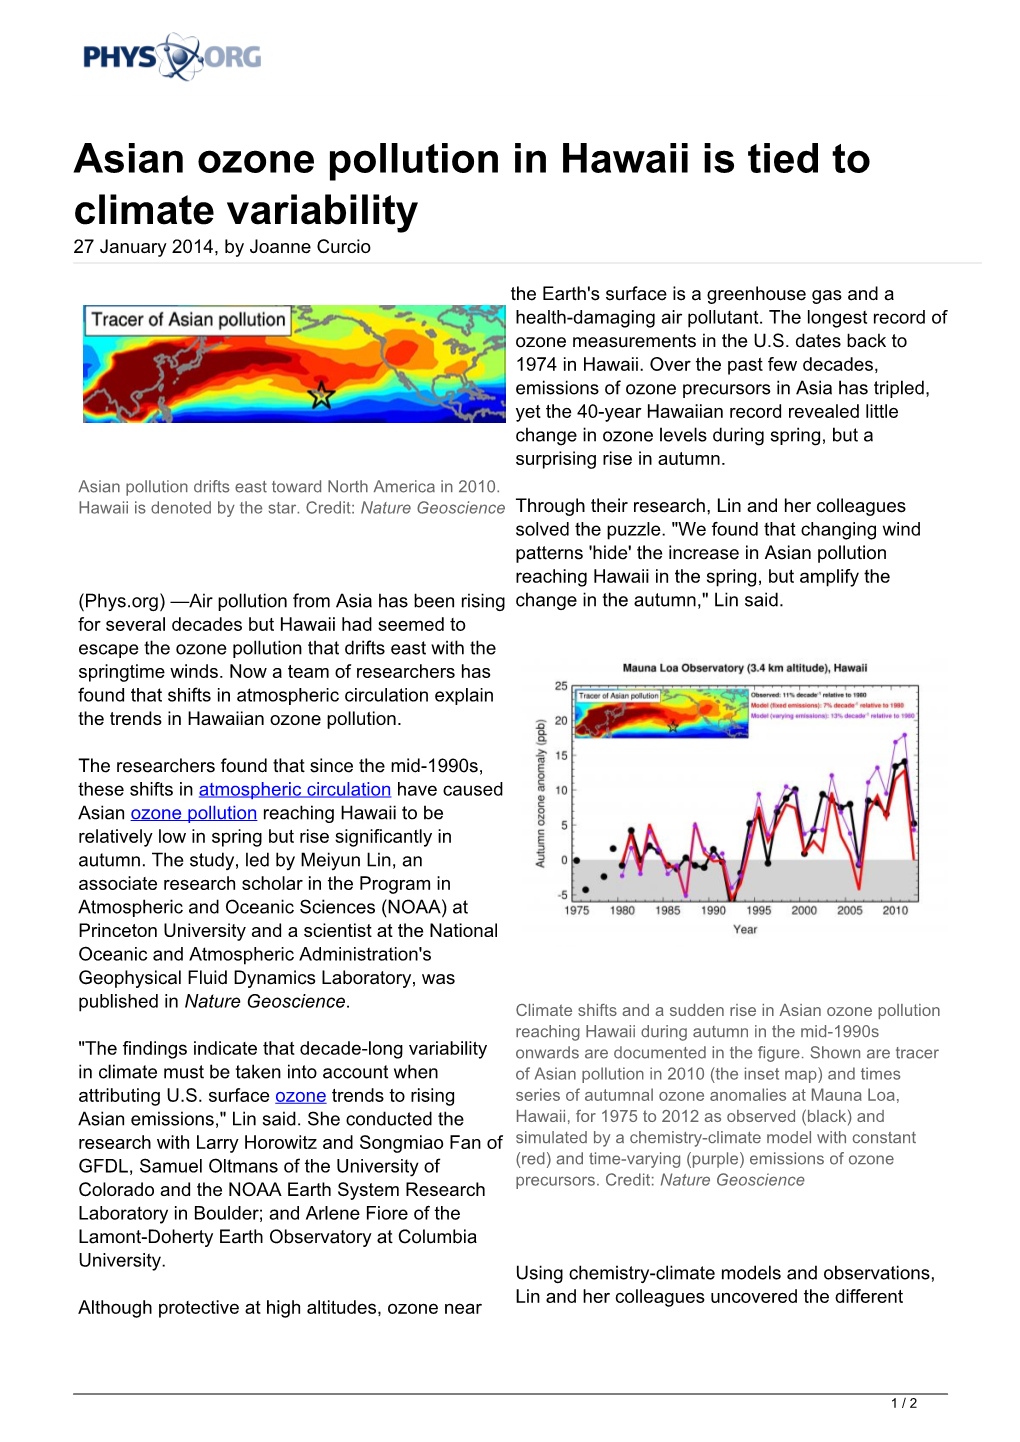 Asian Ozone Pollution in Hawaii Is Tied to Climate Variability 27 January 2014, by Joanne Curcio